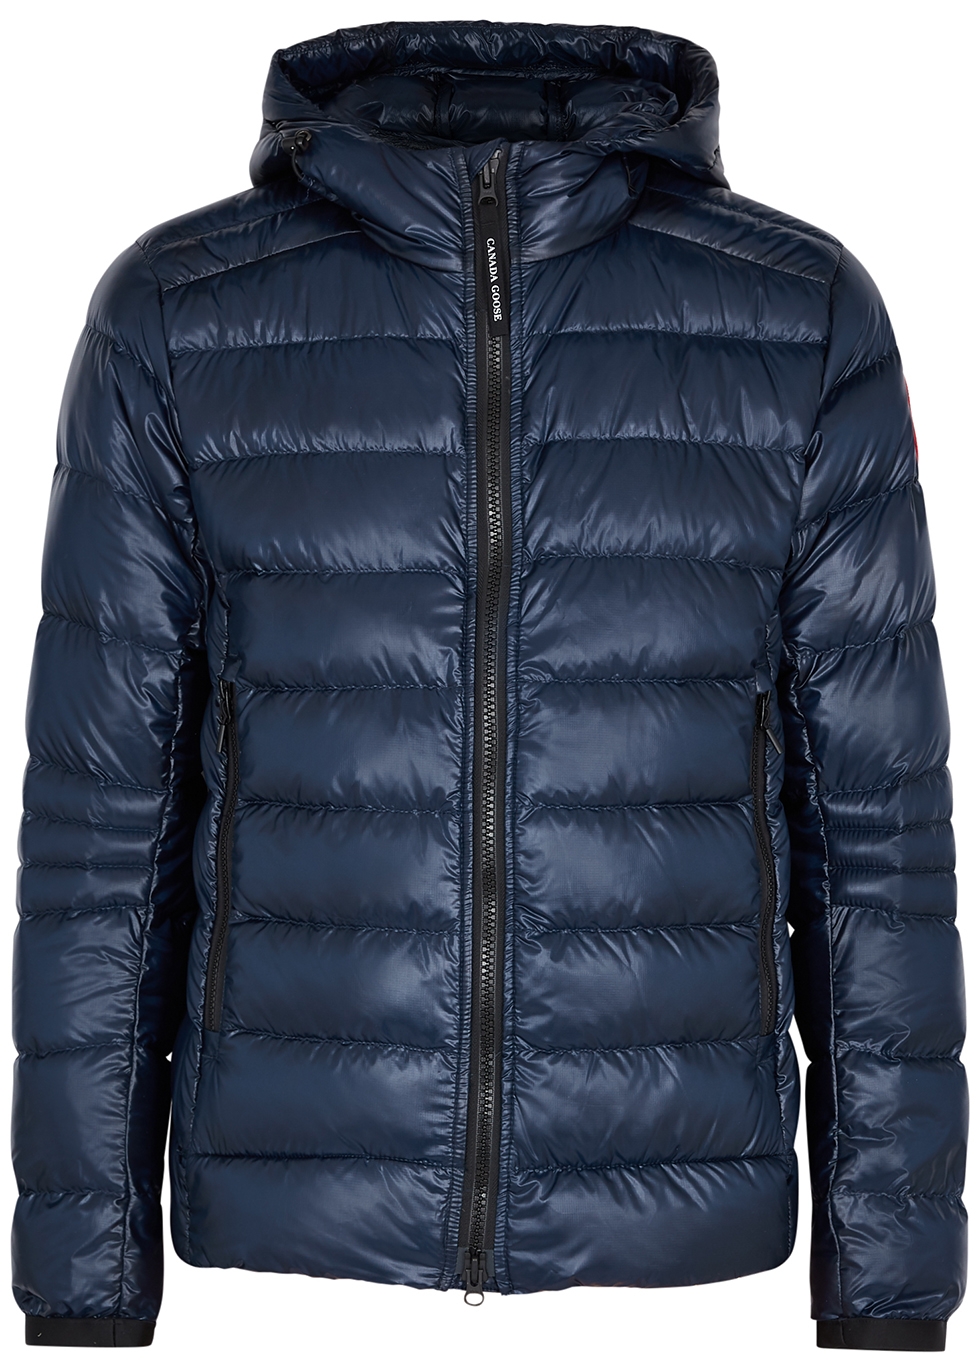 Crofton navy quilted shell jacket